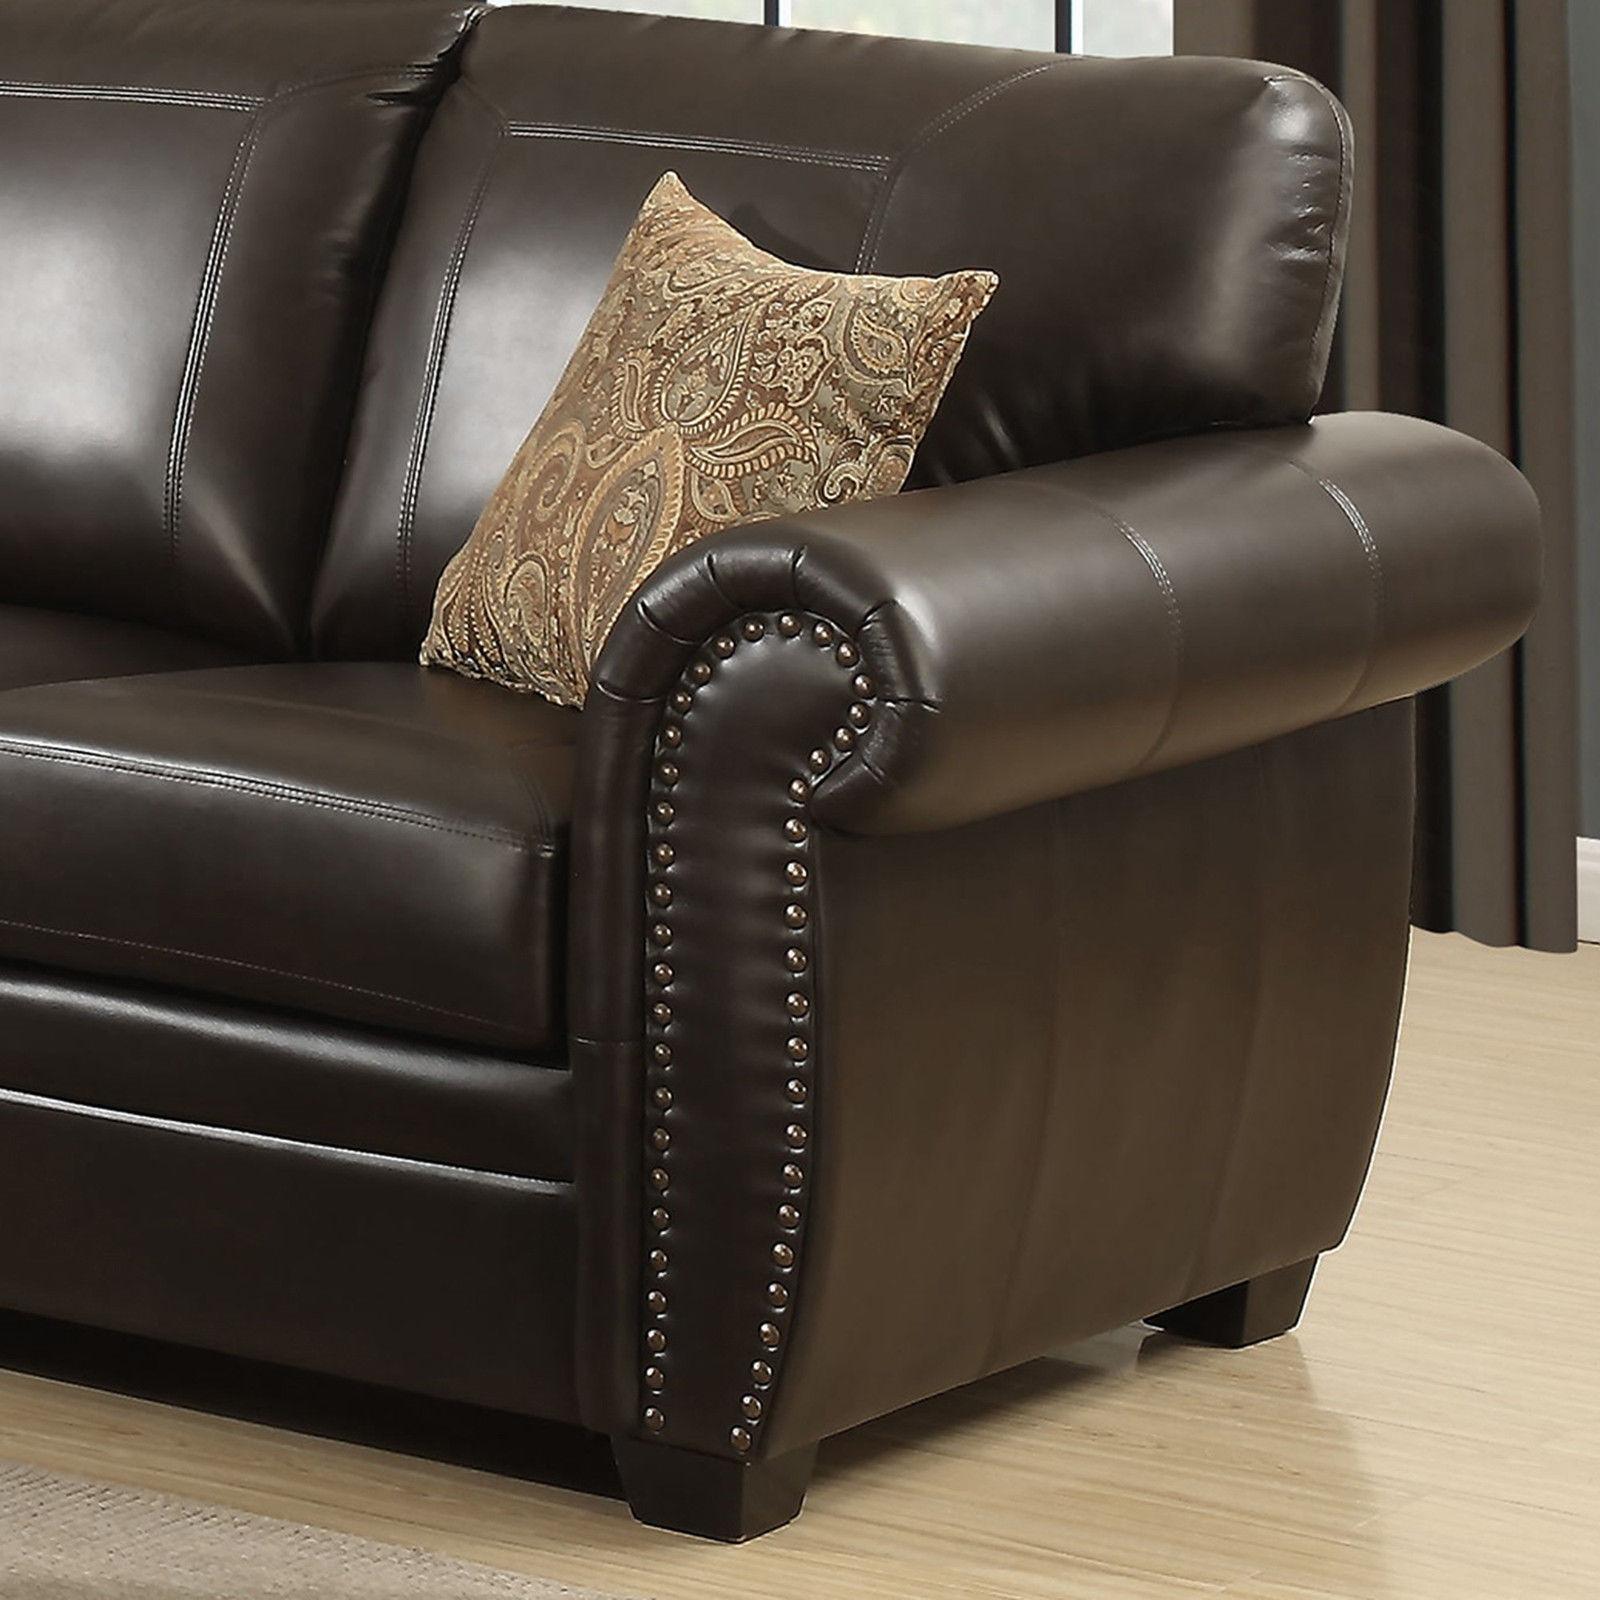 

    
LOUIS-BRN-4PC-SECTIONAL AC Pacific Louis Modern Dark Brown Leather Gel 4Pcs Sectional with Ottoman
